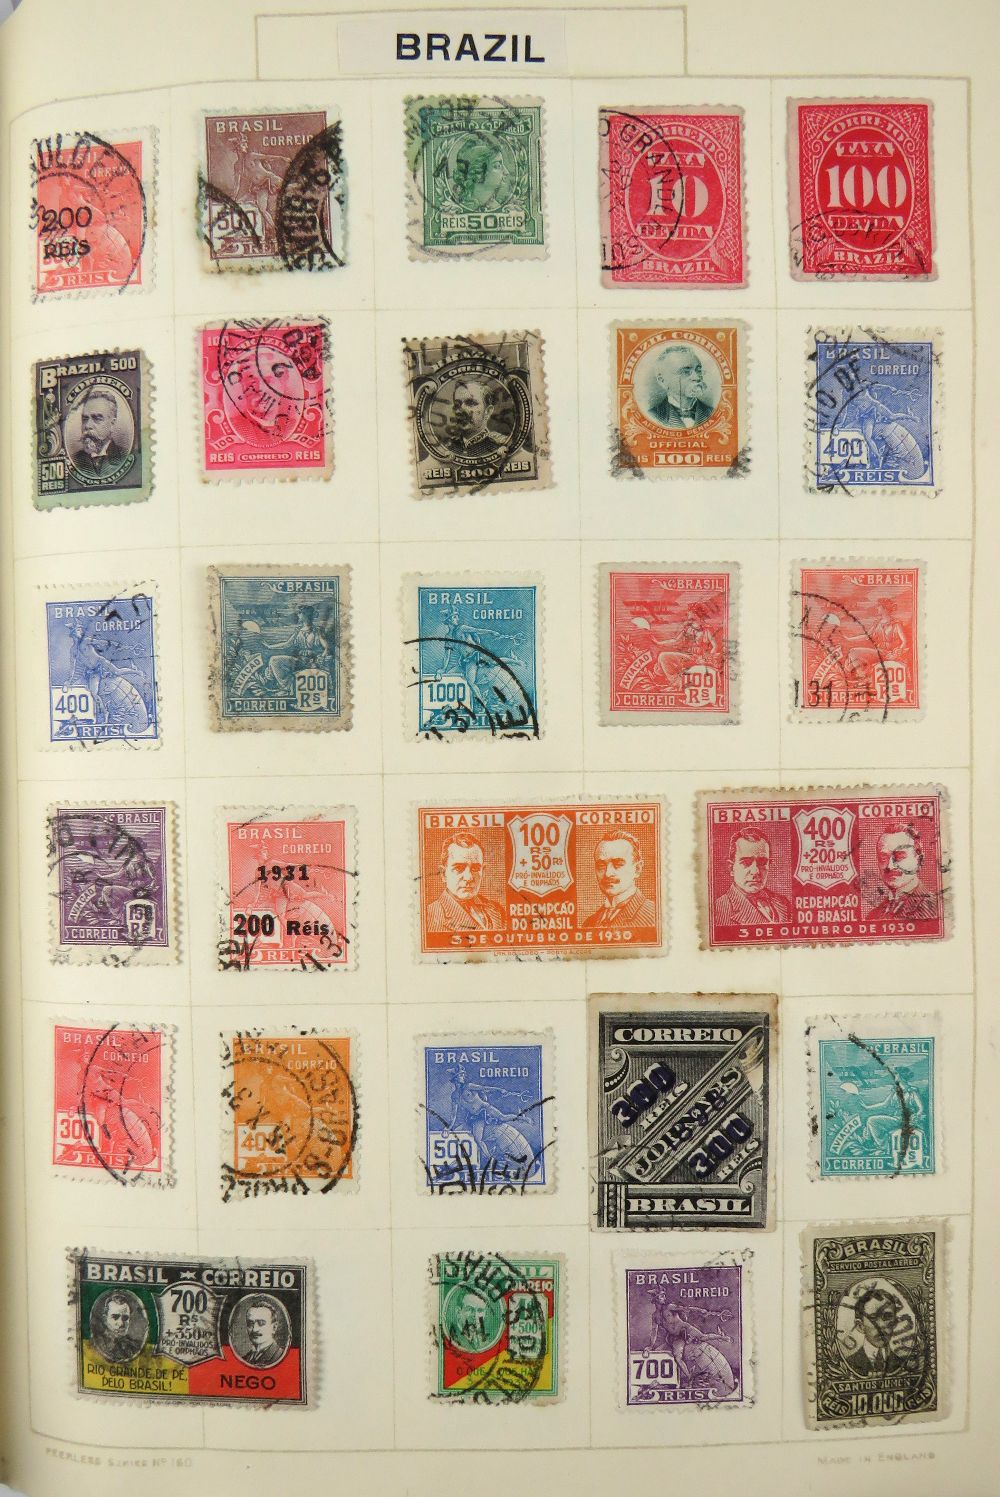 Stamp Collection: Very good late 19th Century / early 20th Century family Stamp Collection in